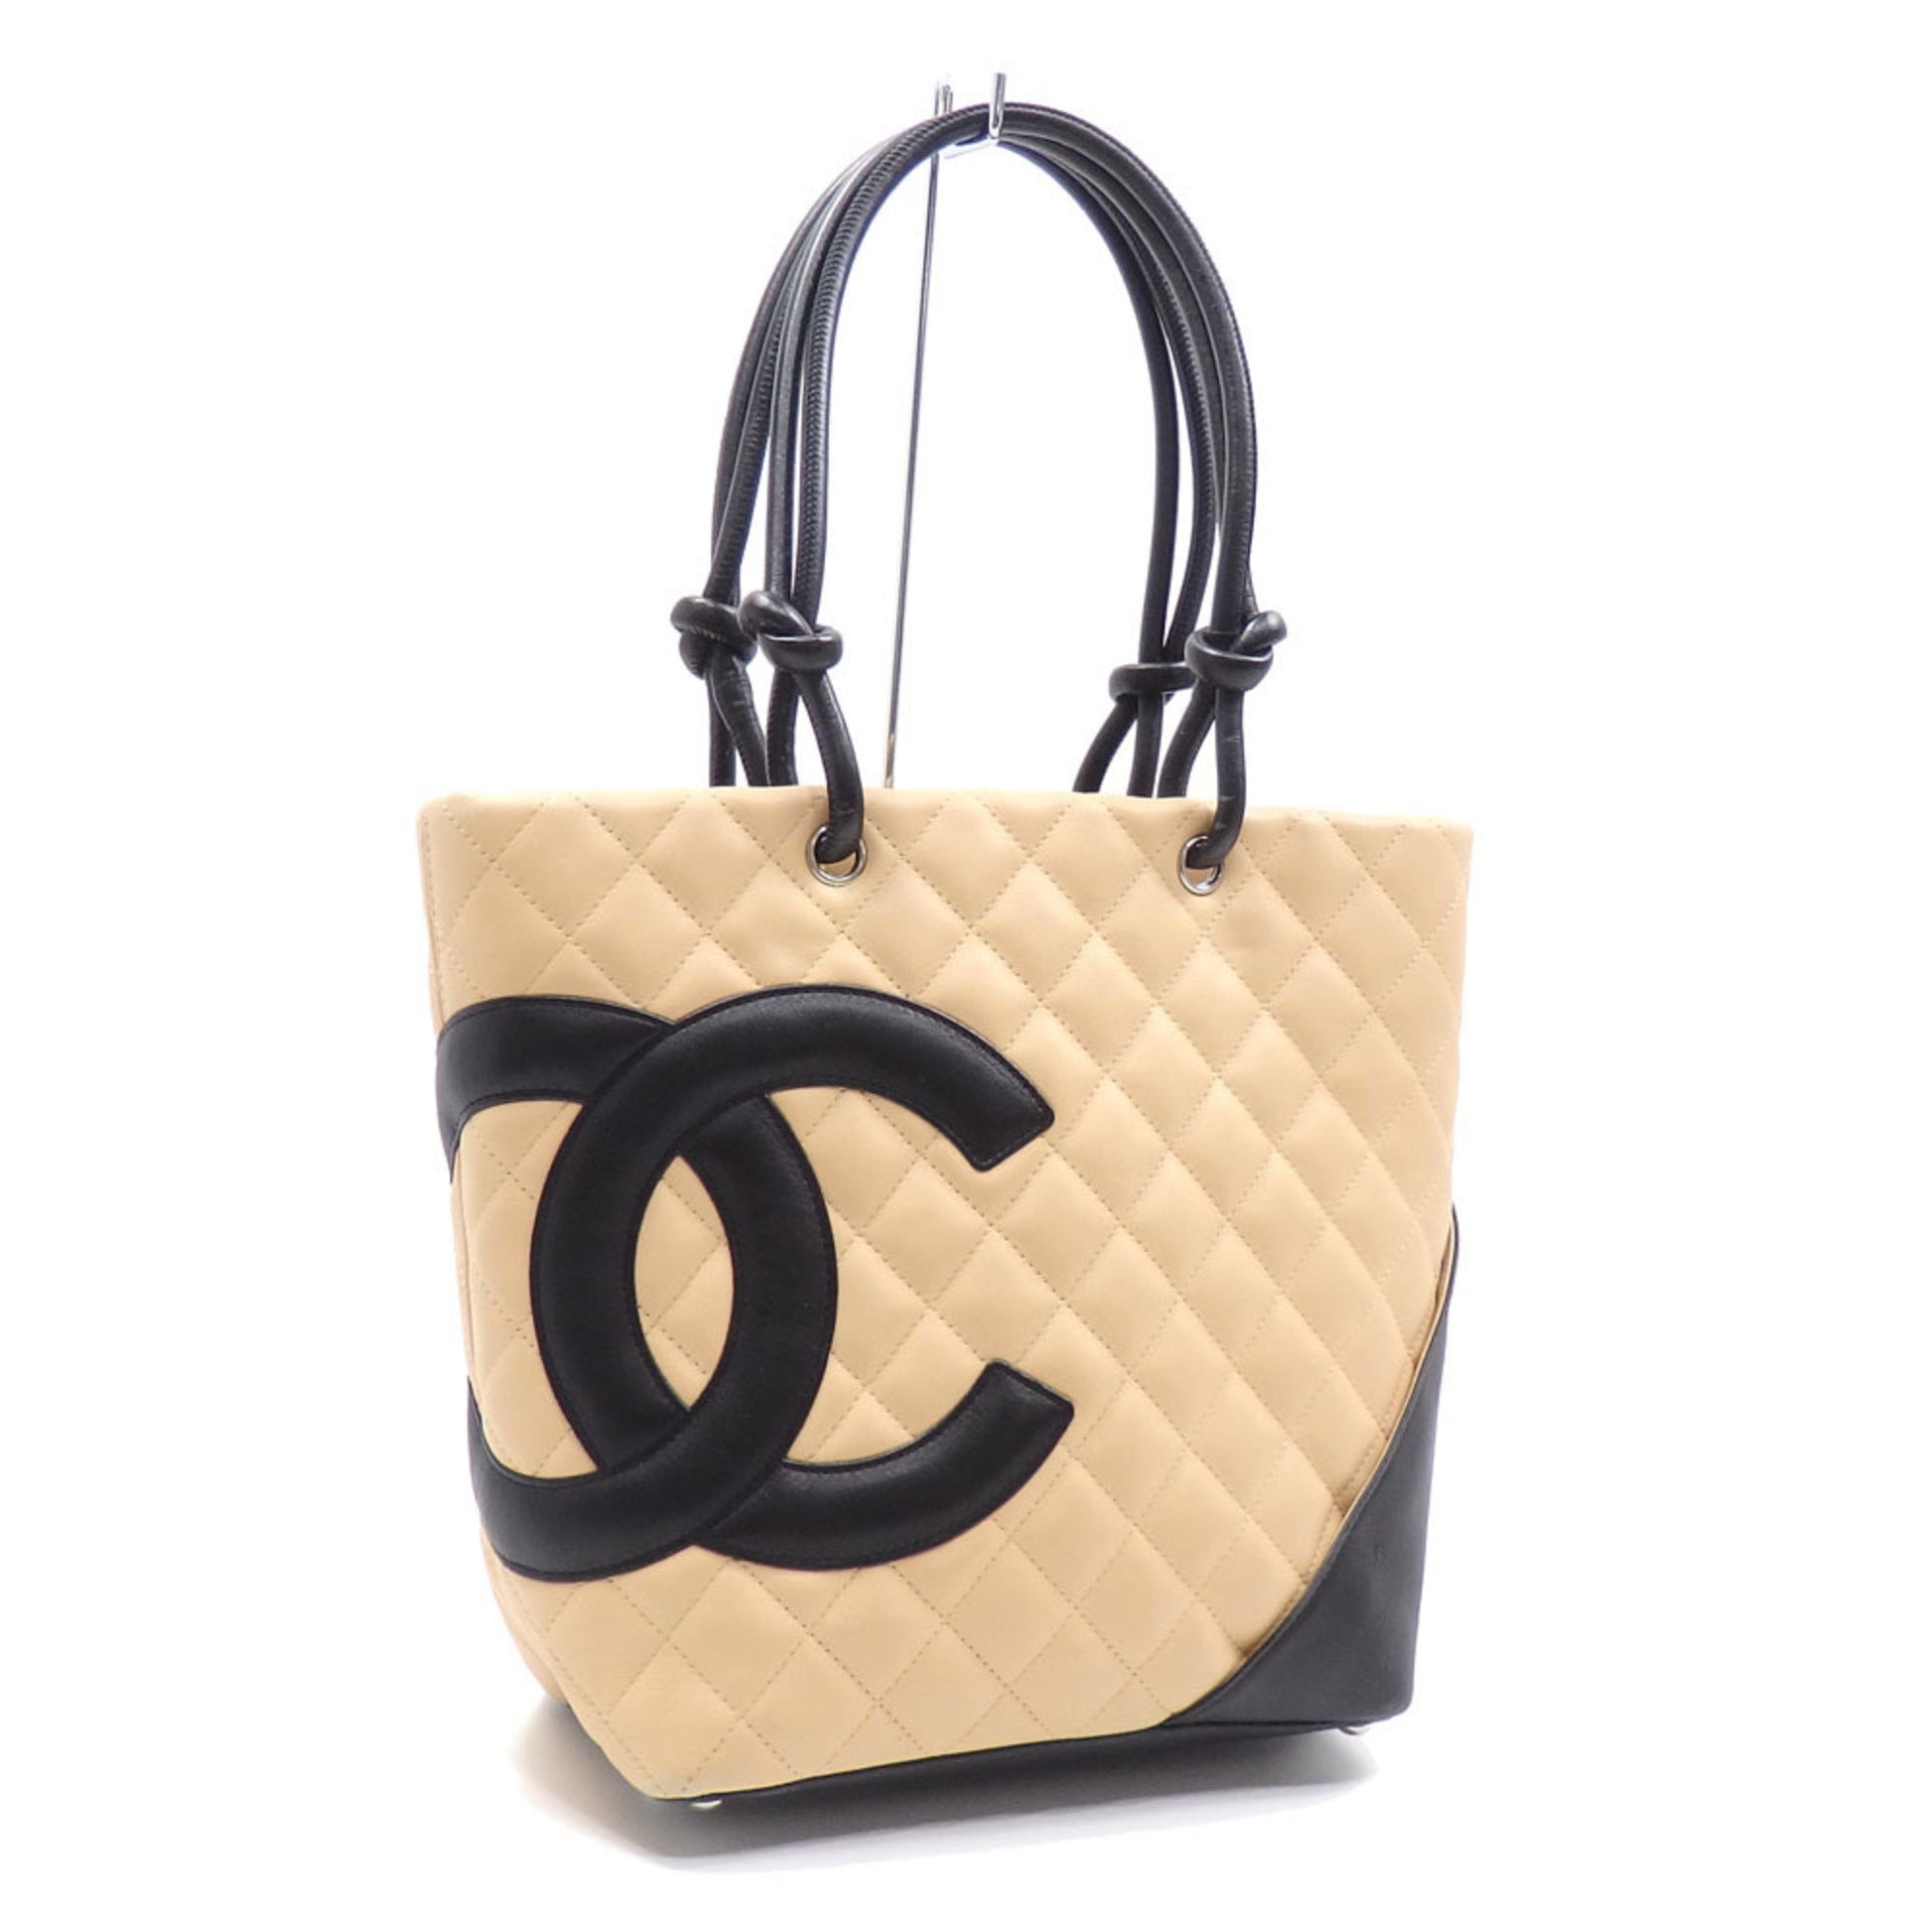 Chanel cambon line tote bag handbag Color white x black used from japan